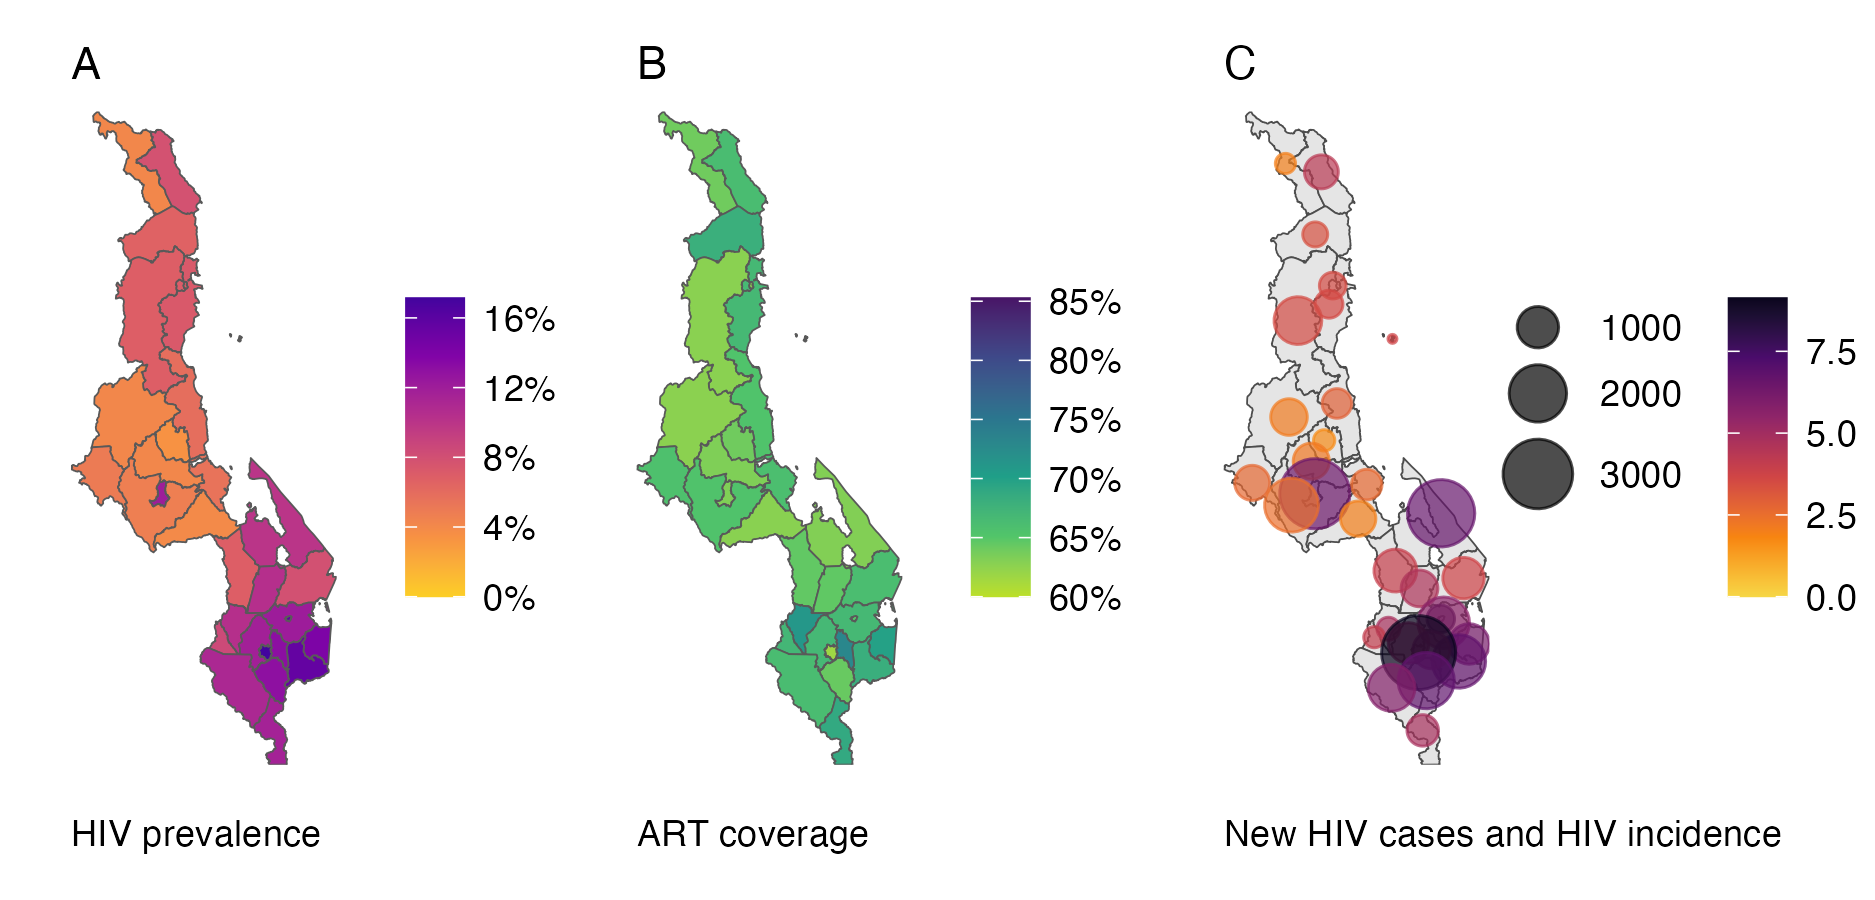 District-level HIV prevalence, ART coverage, and new HIV cases and HIV incidence for adults 15-49 in Malawi. Inference here was conducted using a Gaussian approximation and EB via TMB.